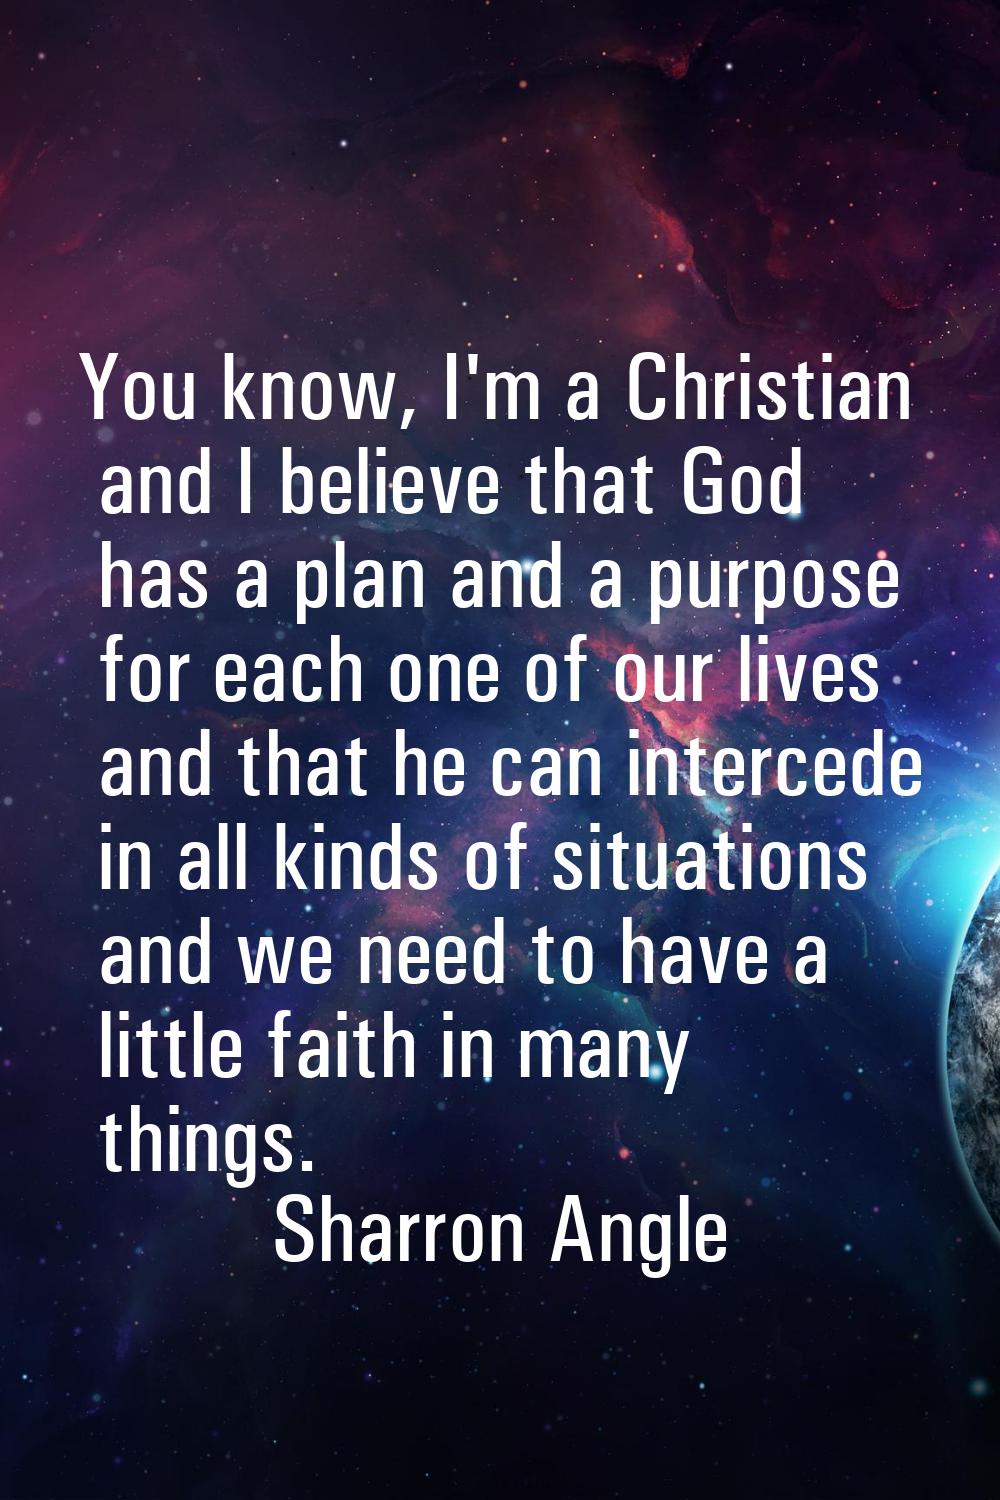 You know, I'm a Christian and I believe that God has a plan and a purpose for each one of our lives